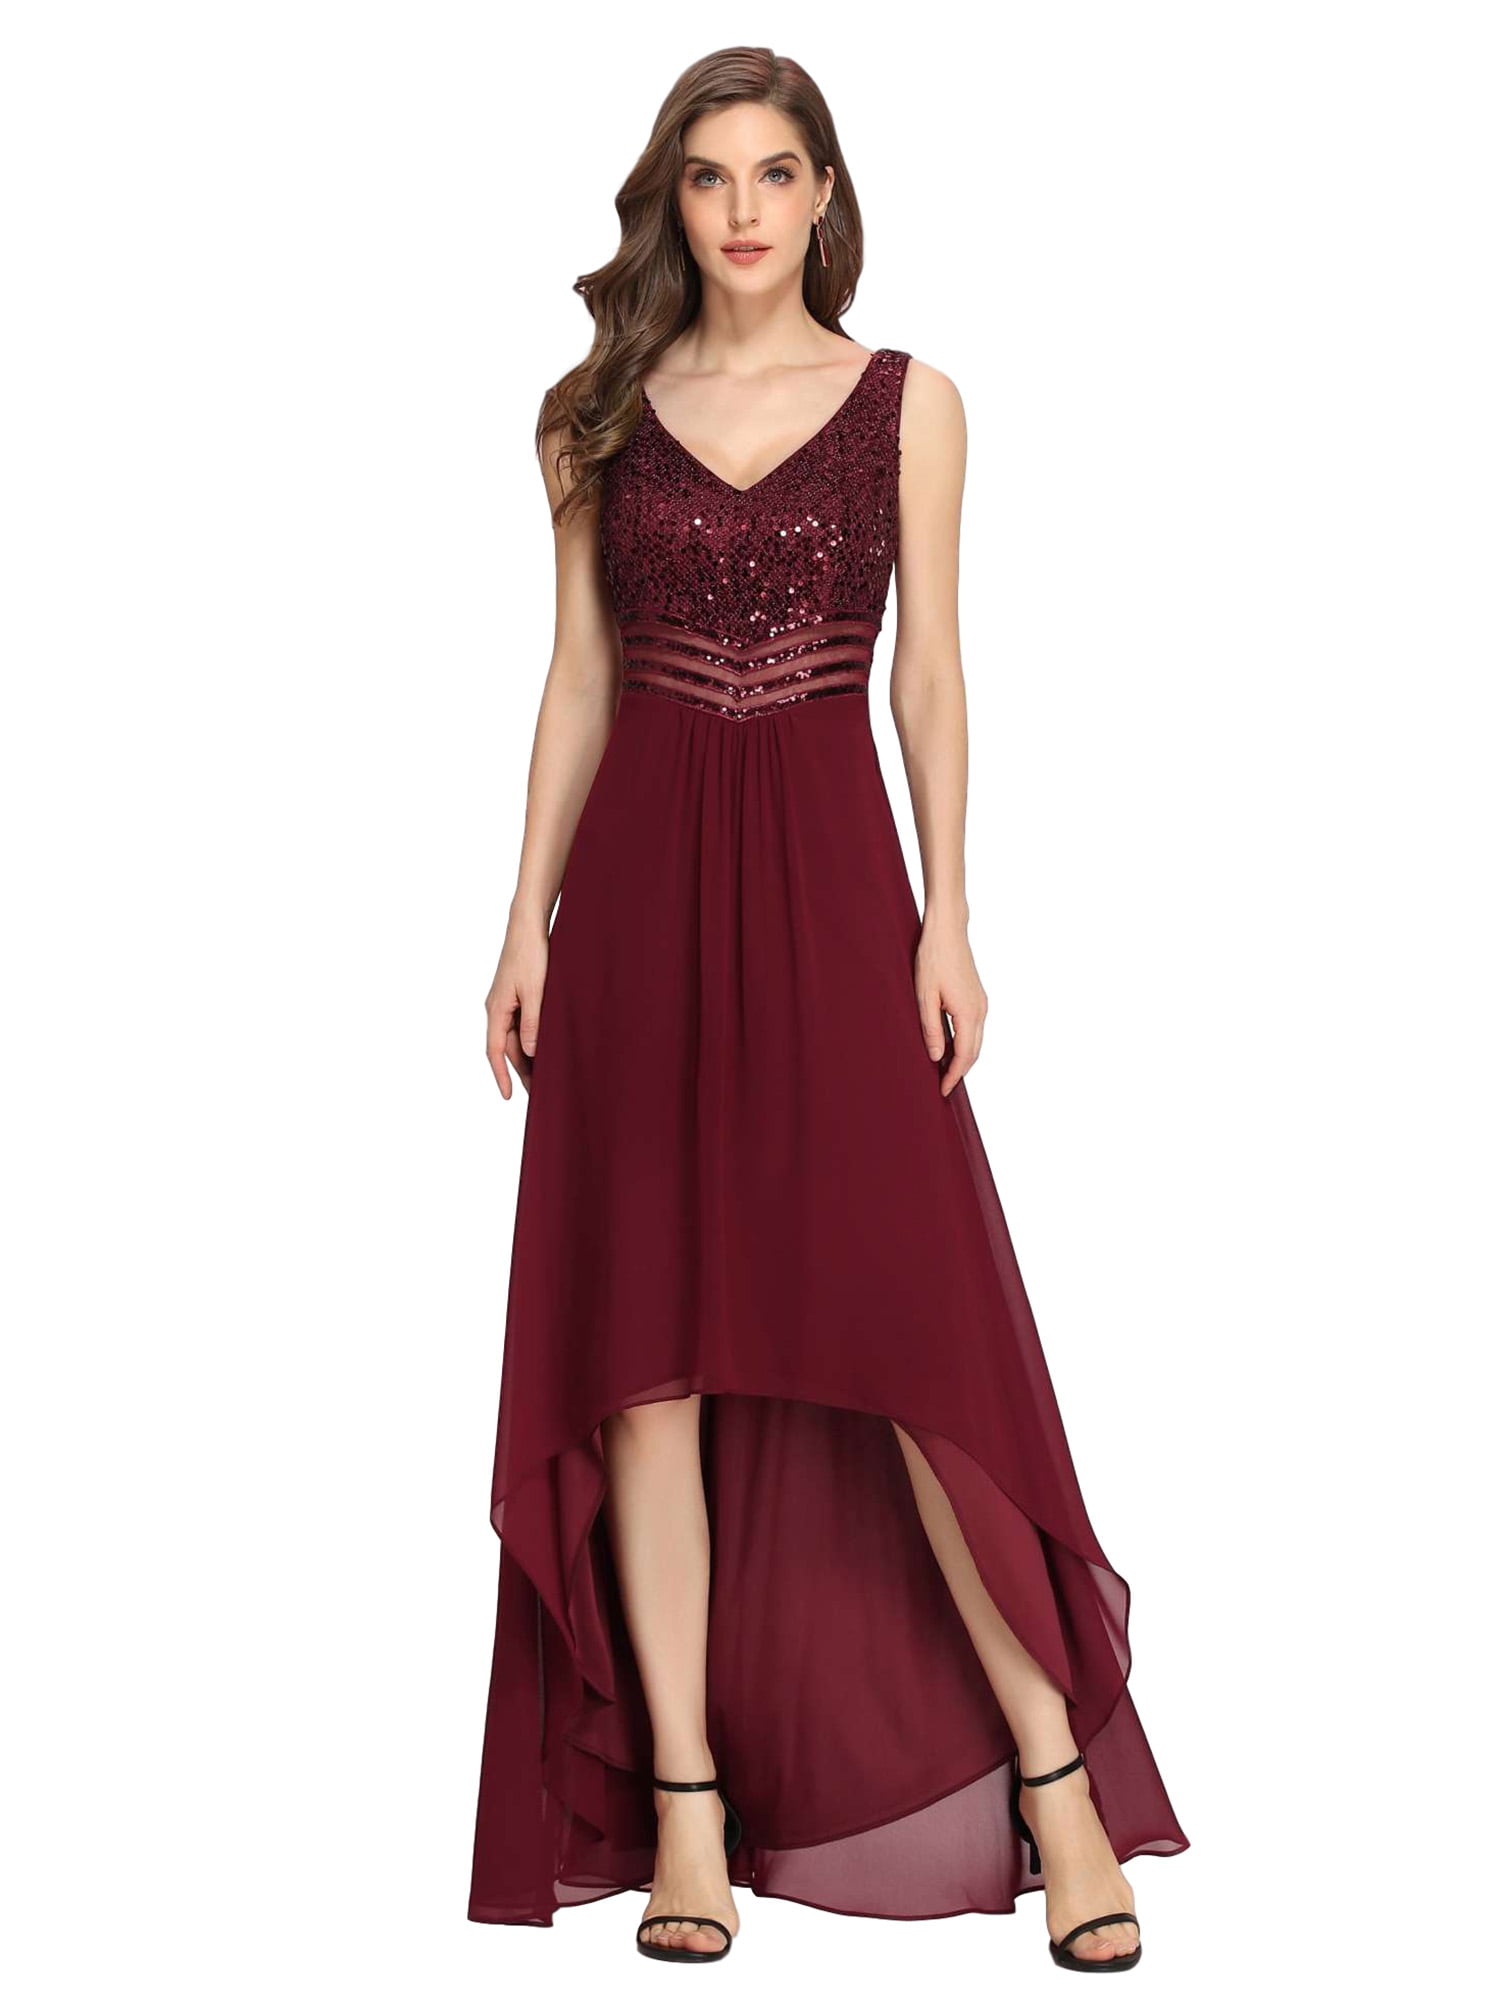 Ever-pretty Long Burgundy Sequins Evening Gowns A-line Cocktail Bridesmaid Dress 